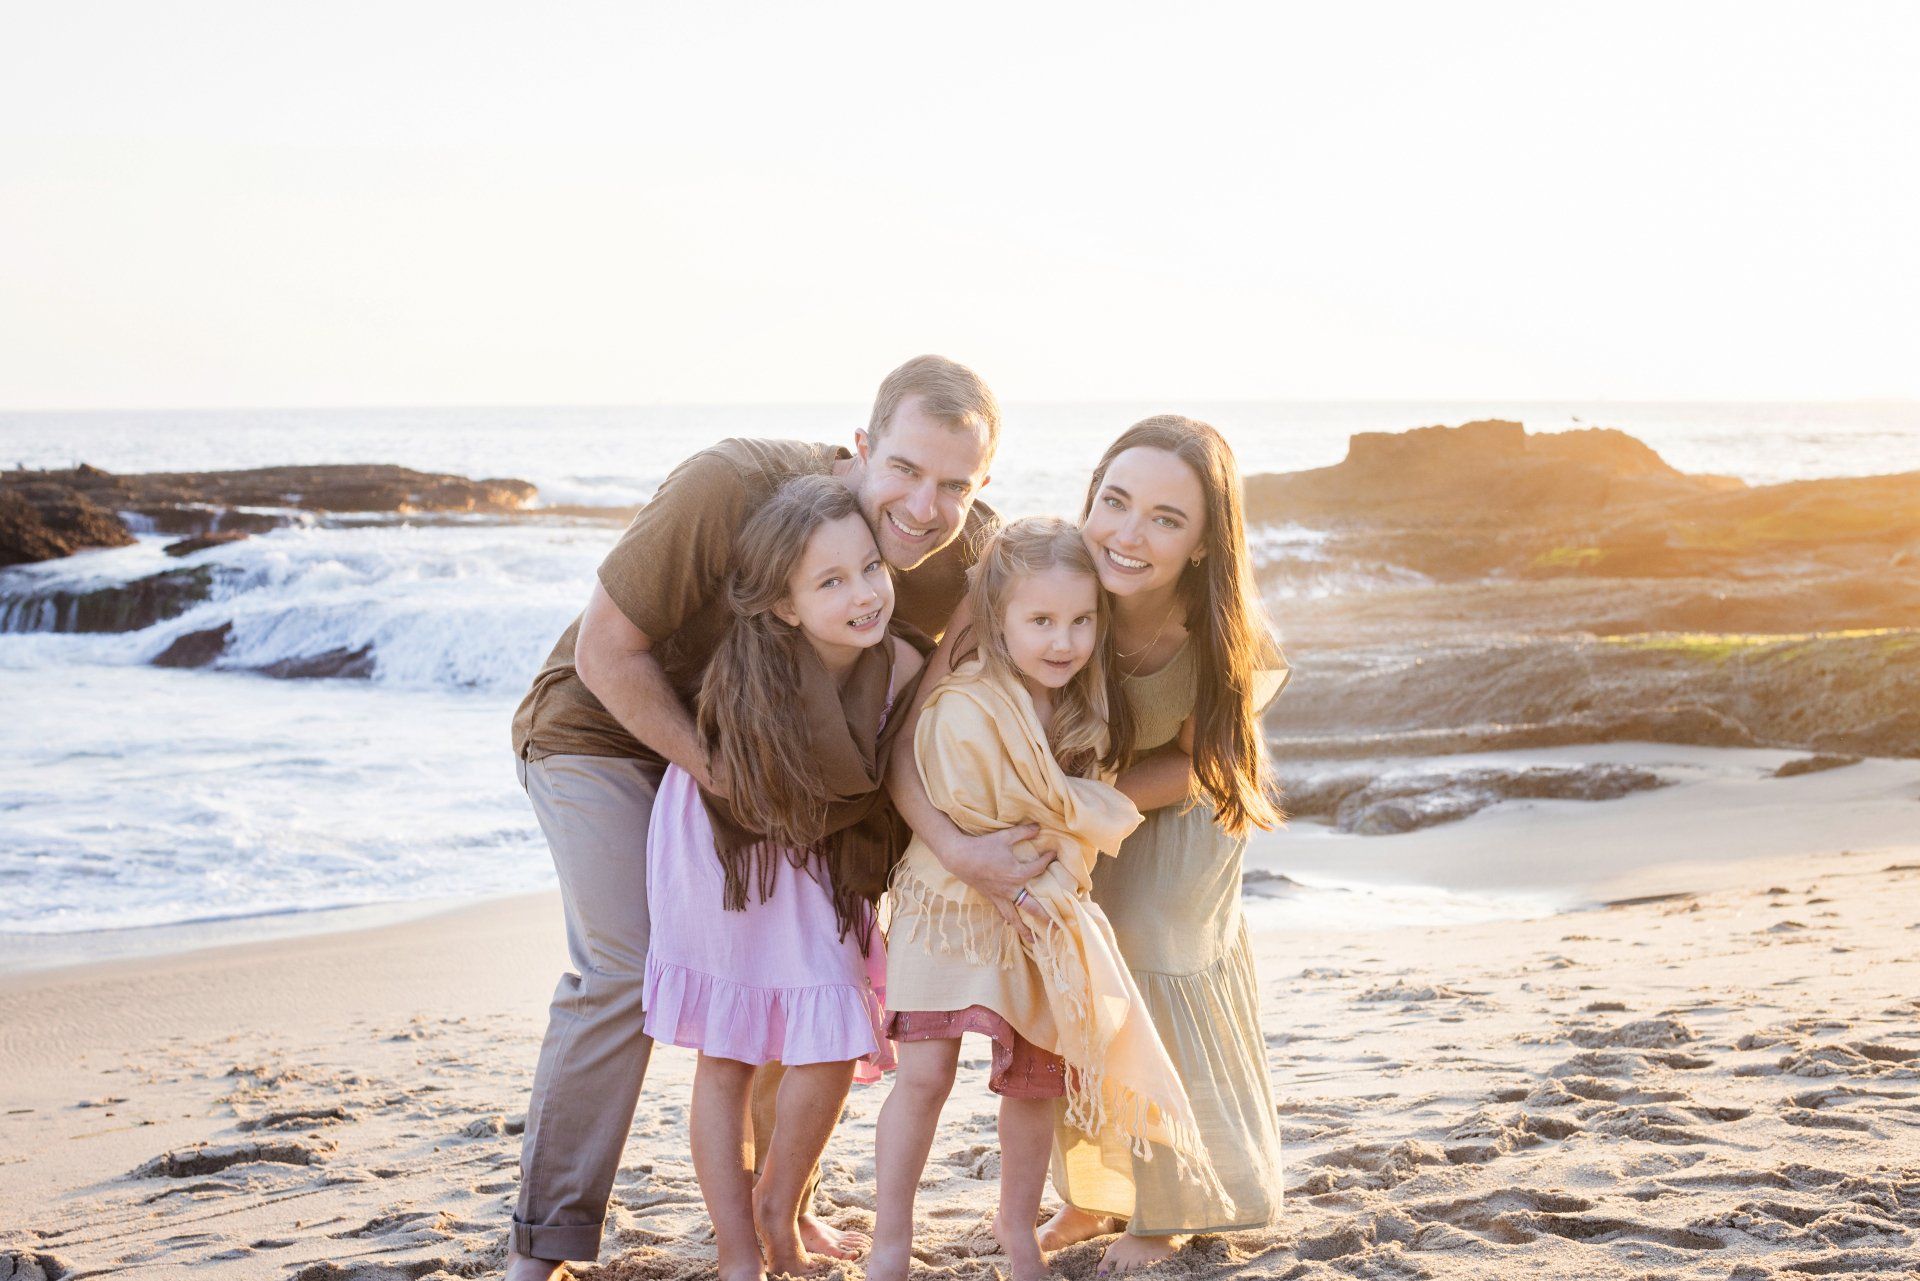 Montage Resort family portrait session at the beach